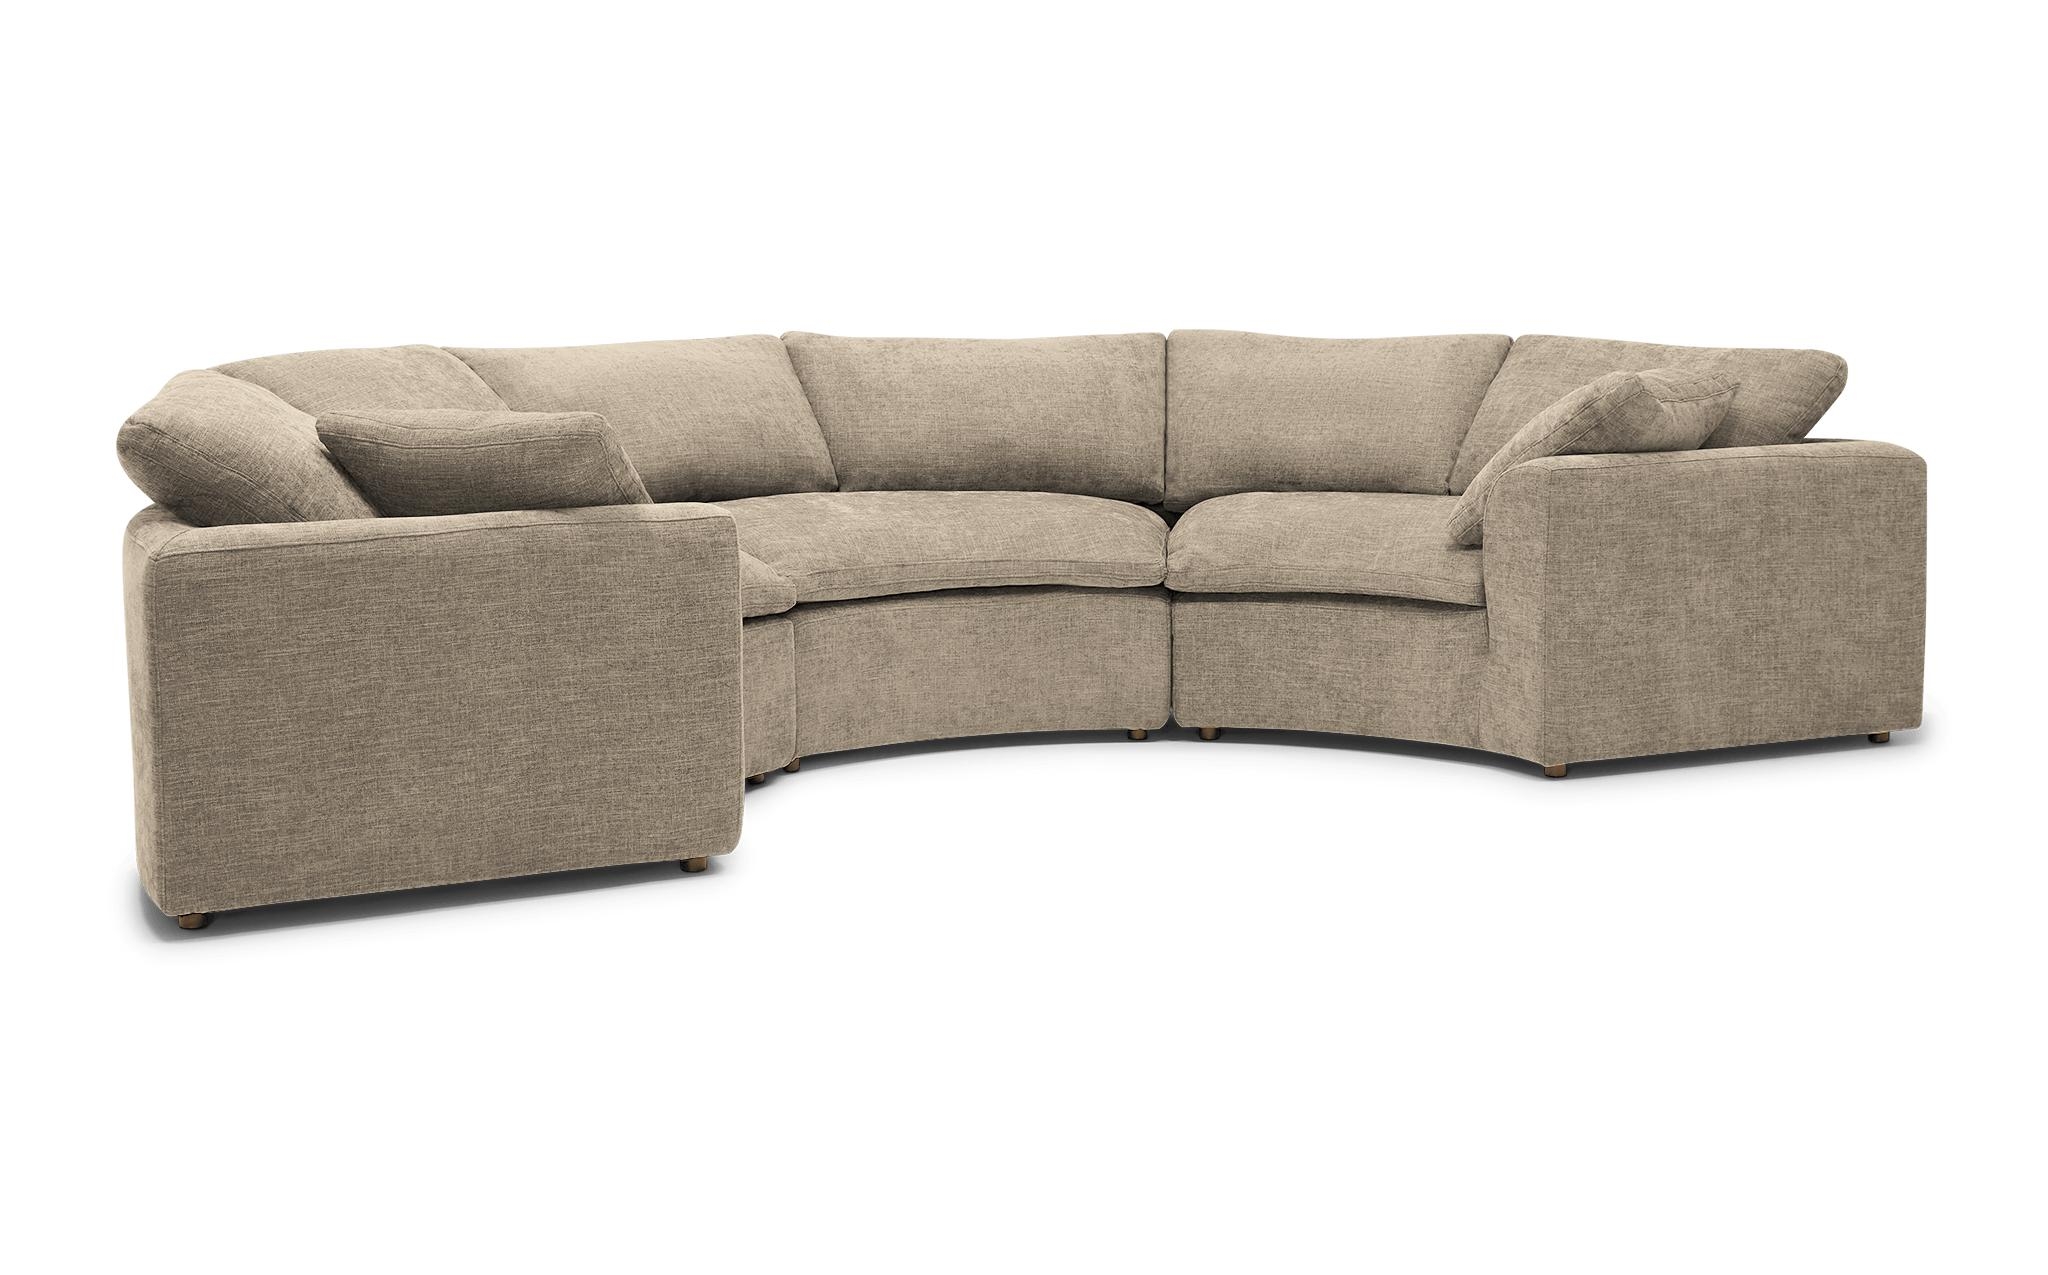 Beige/White Bryant Mid Century Modern Semicircle Sectional (3 Piece) - Cody Sandstone - Image 1